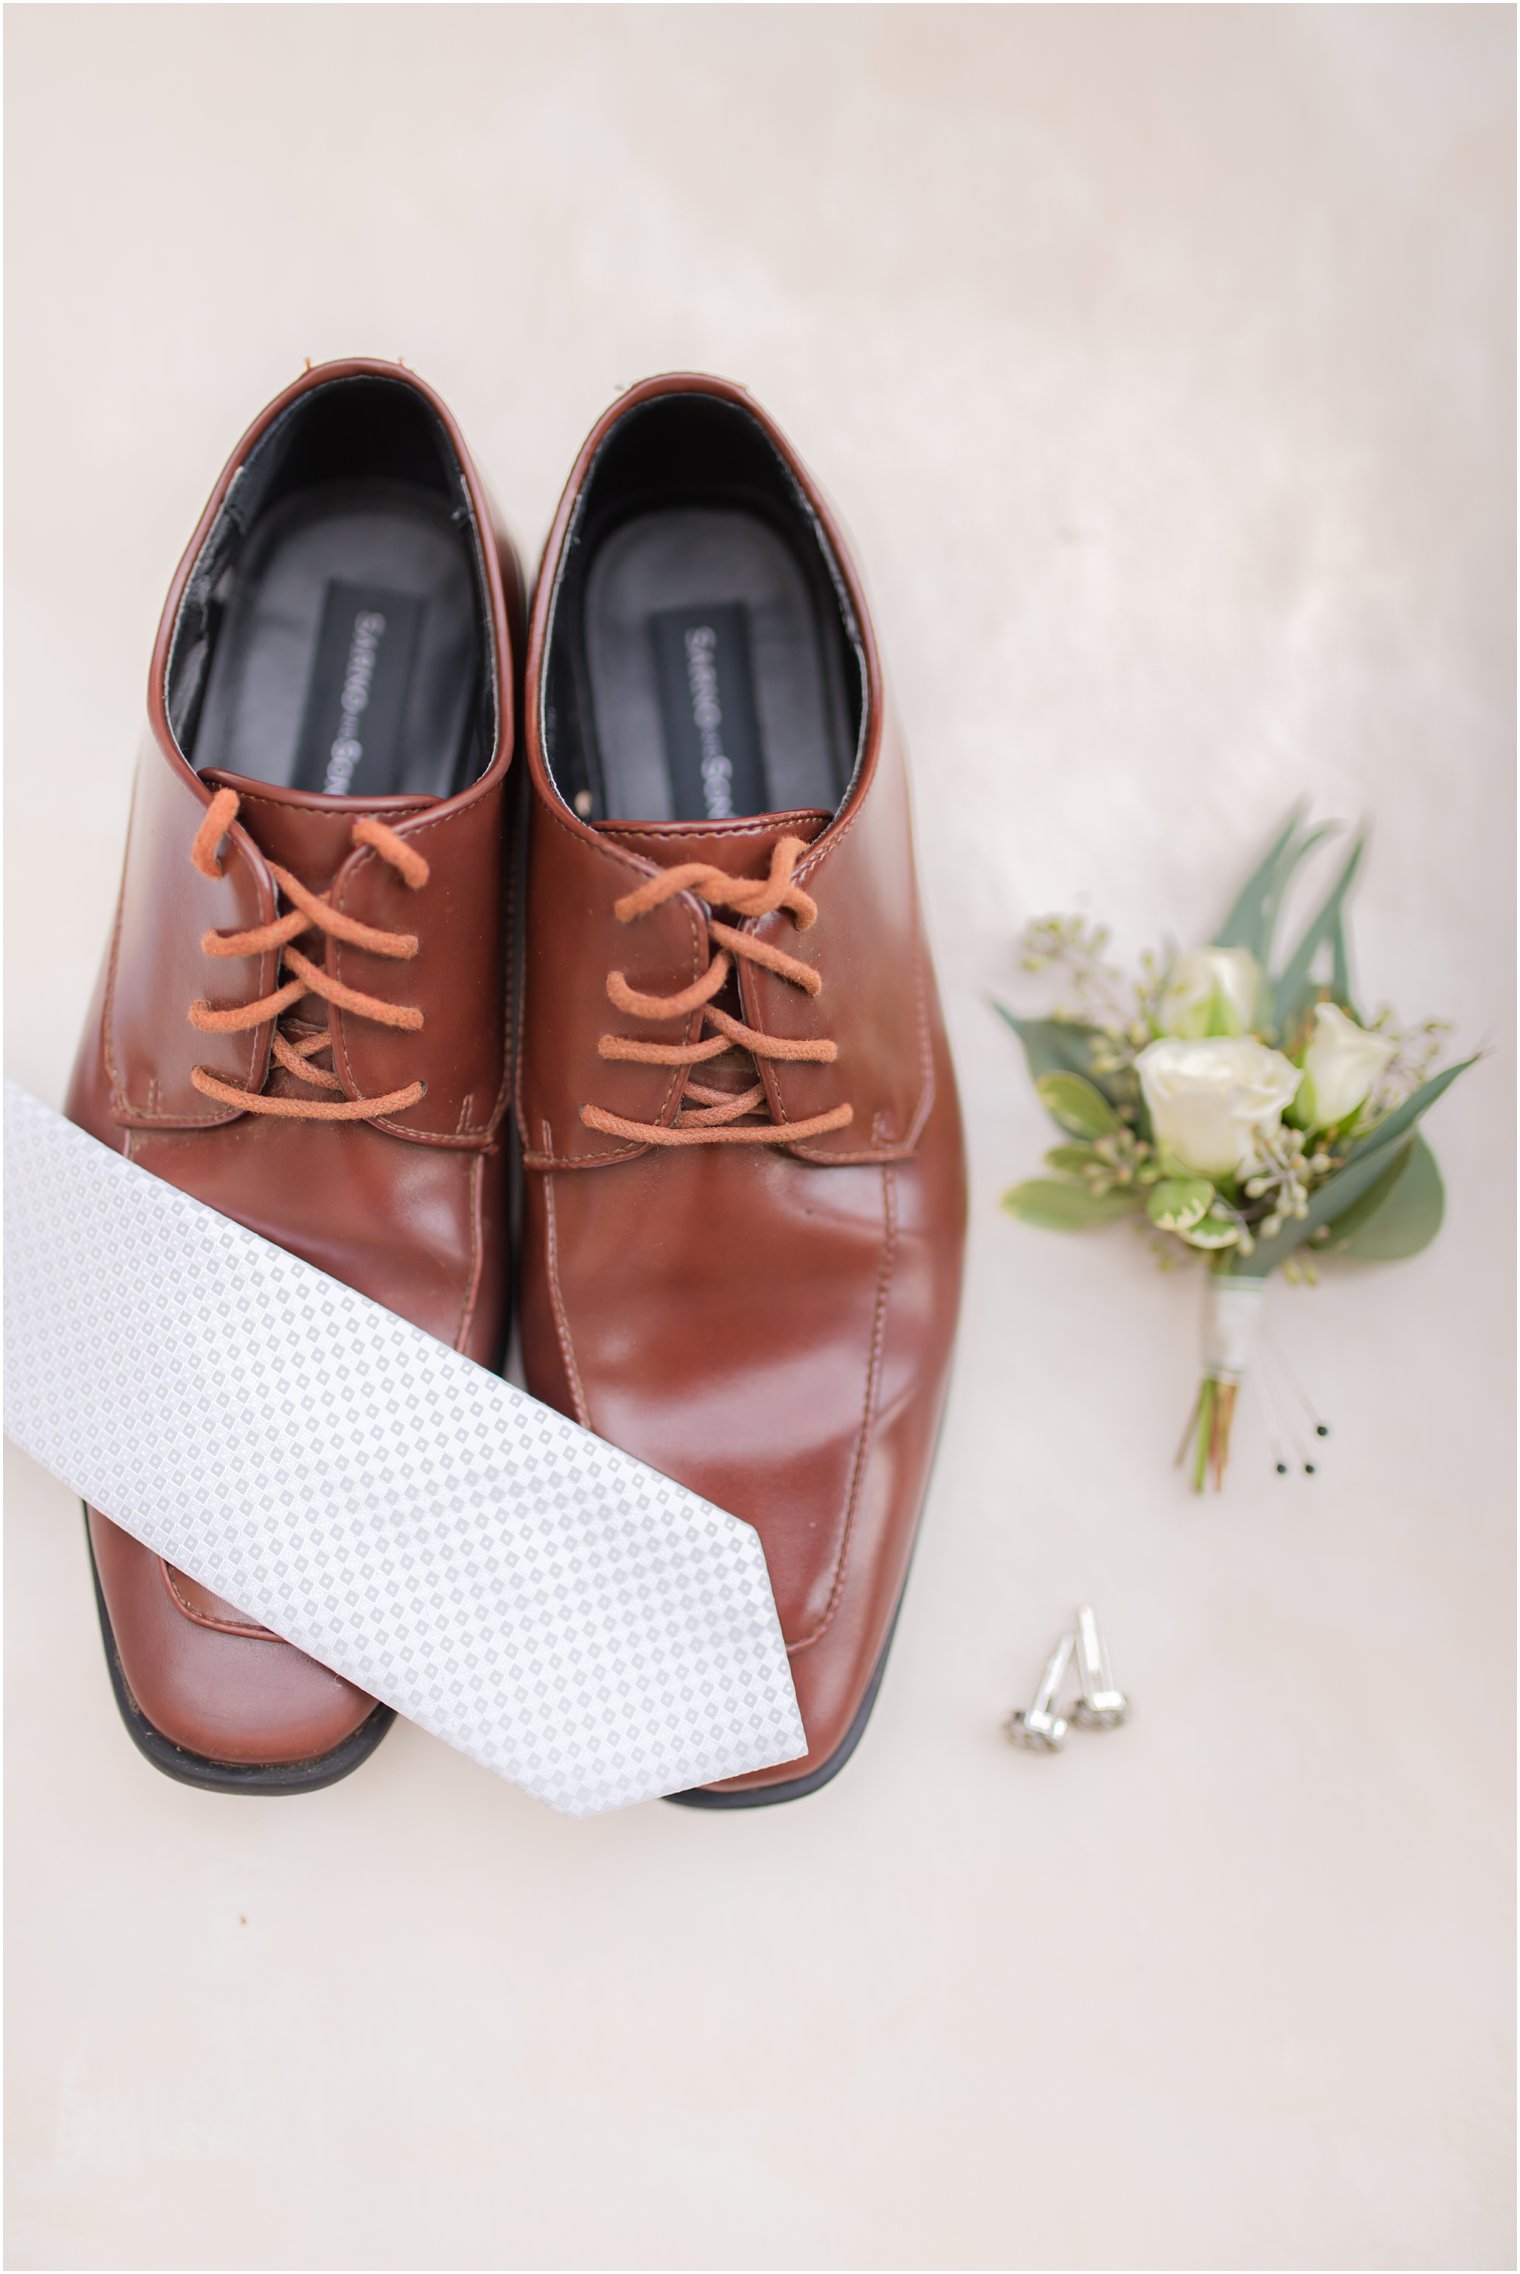 groom's brown shoes for NJ wedding day